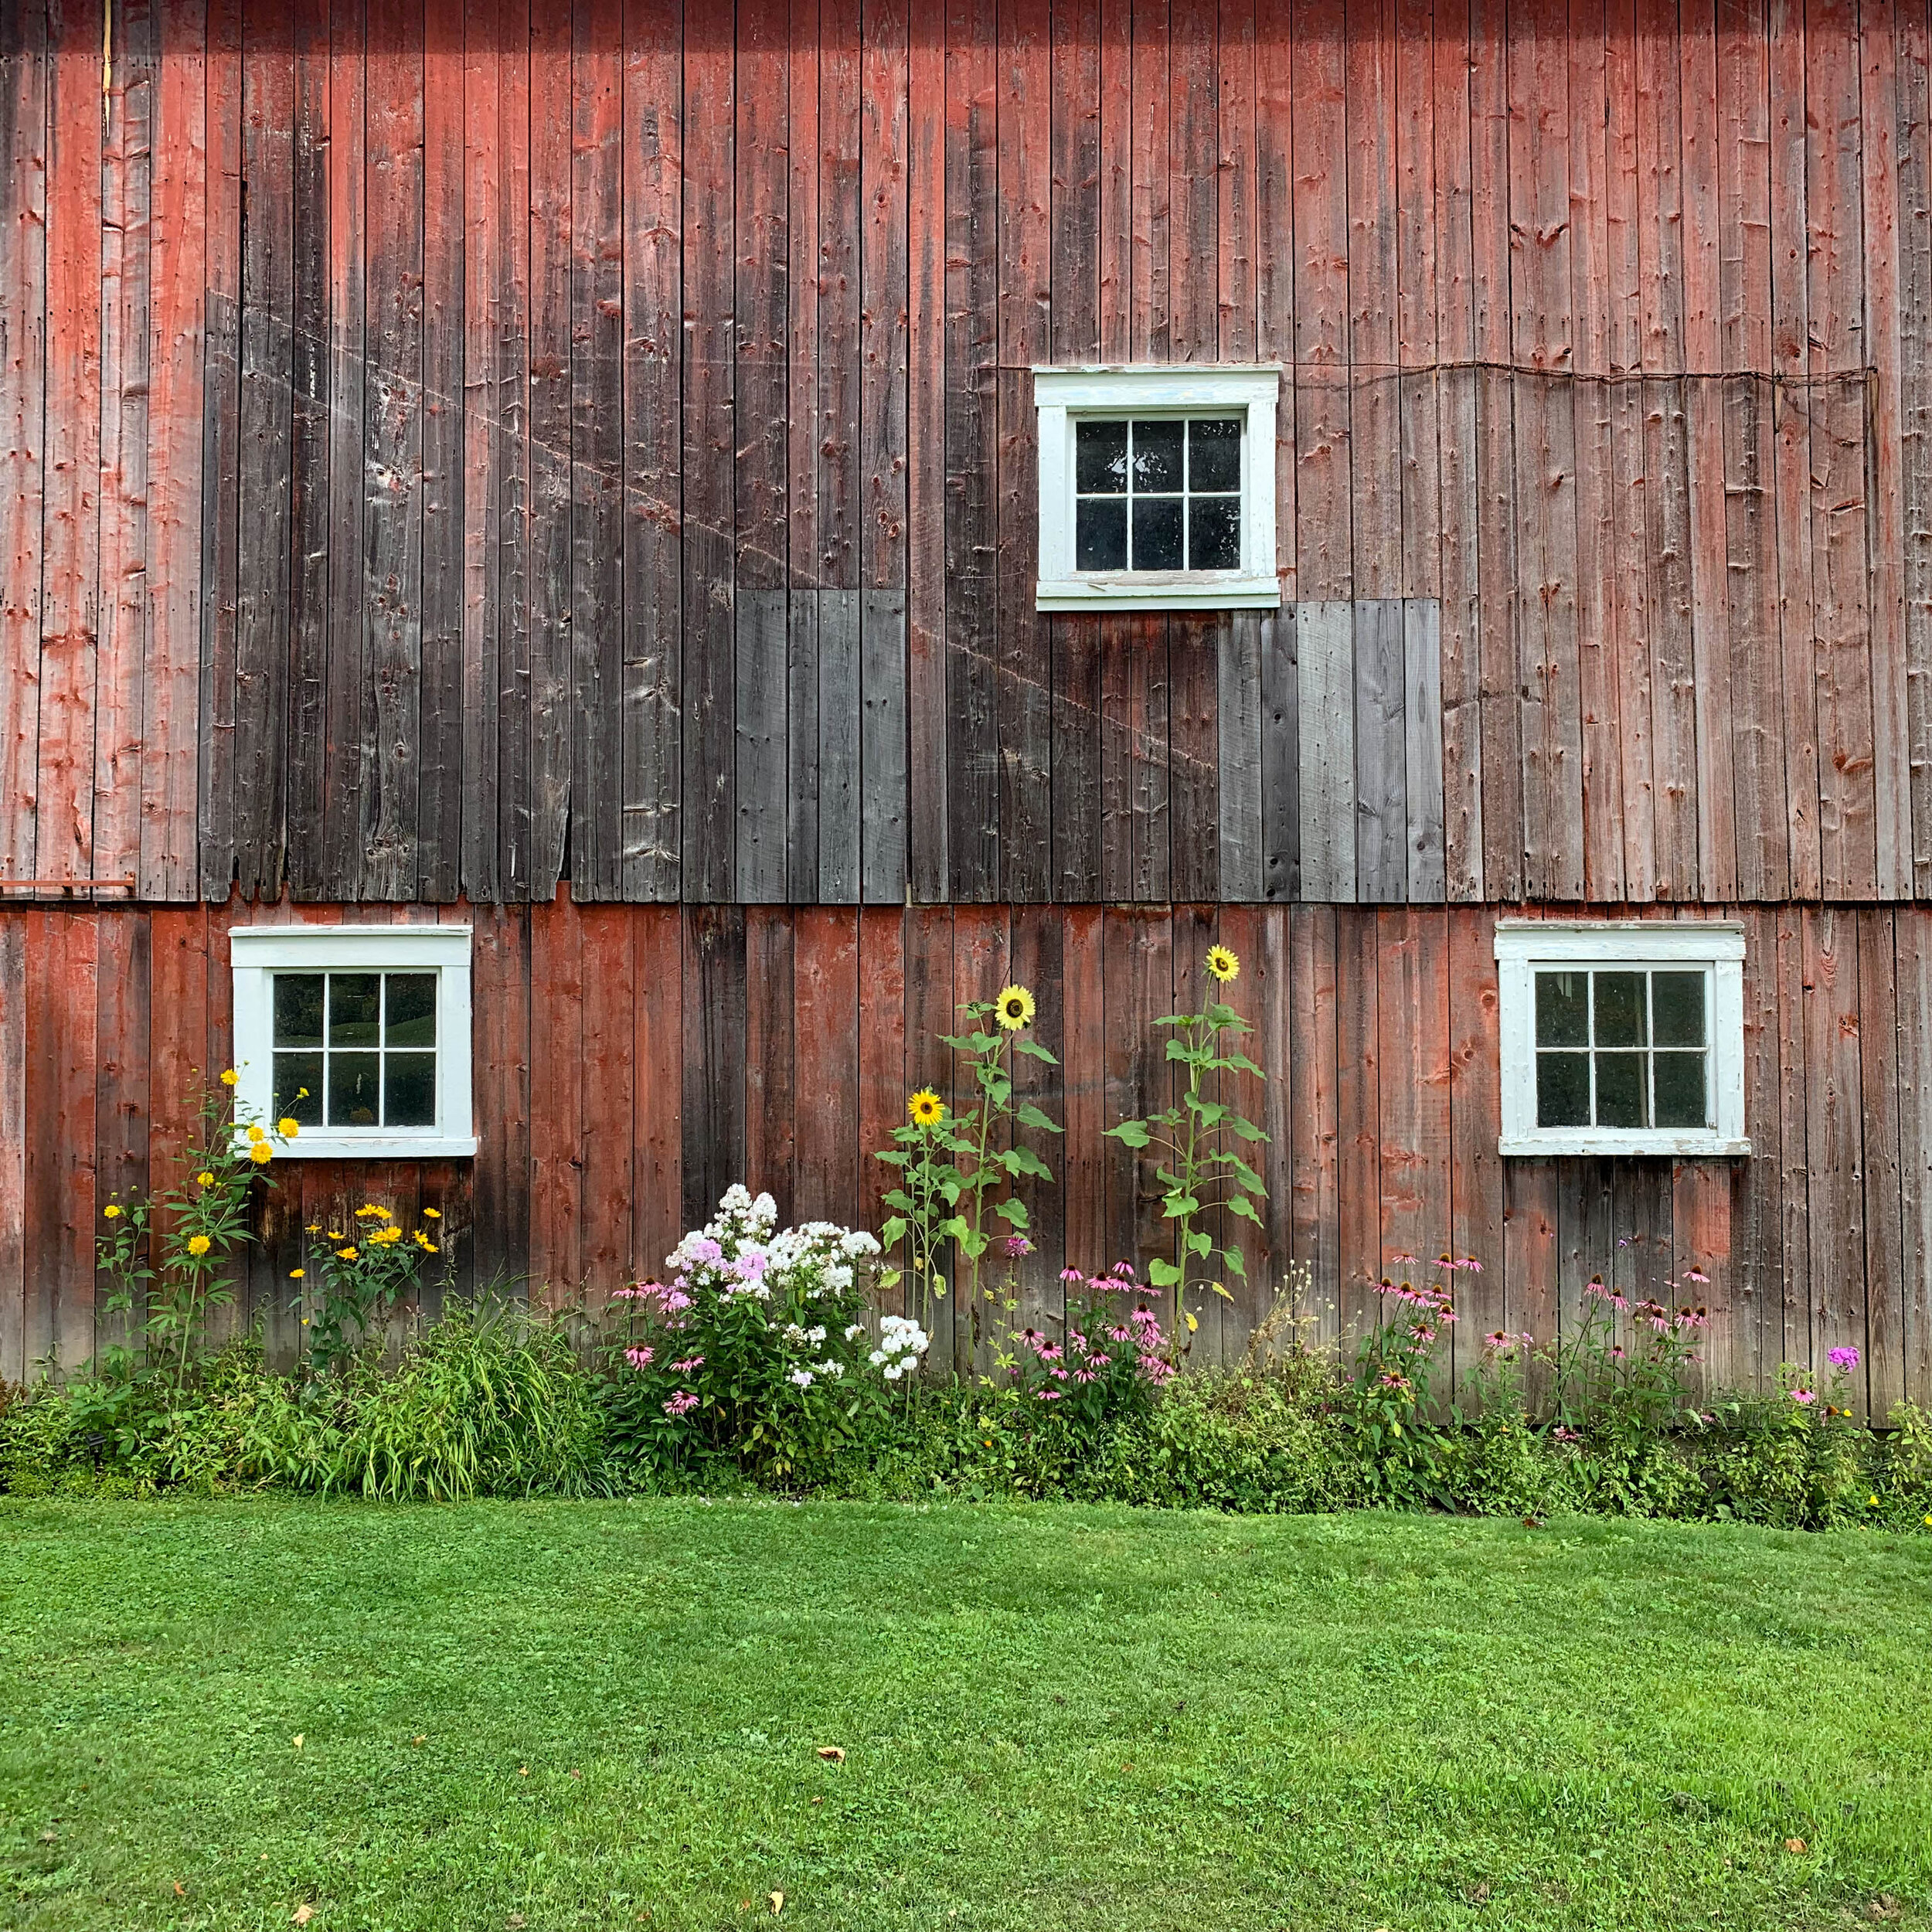 Wildflowers growing outside a rustic red barn